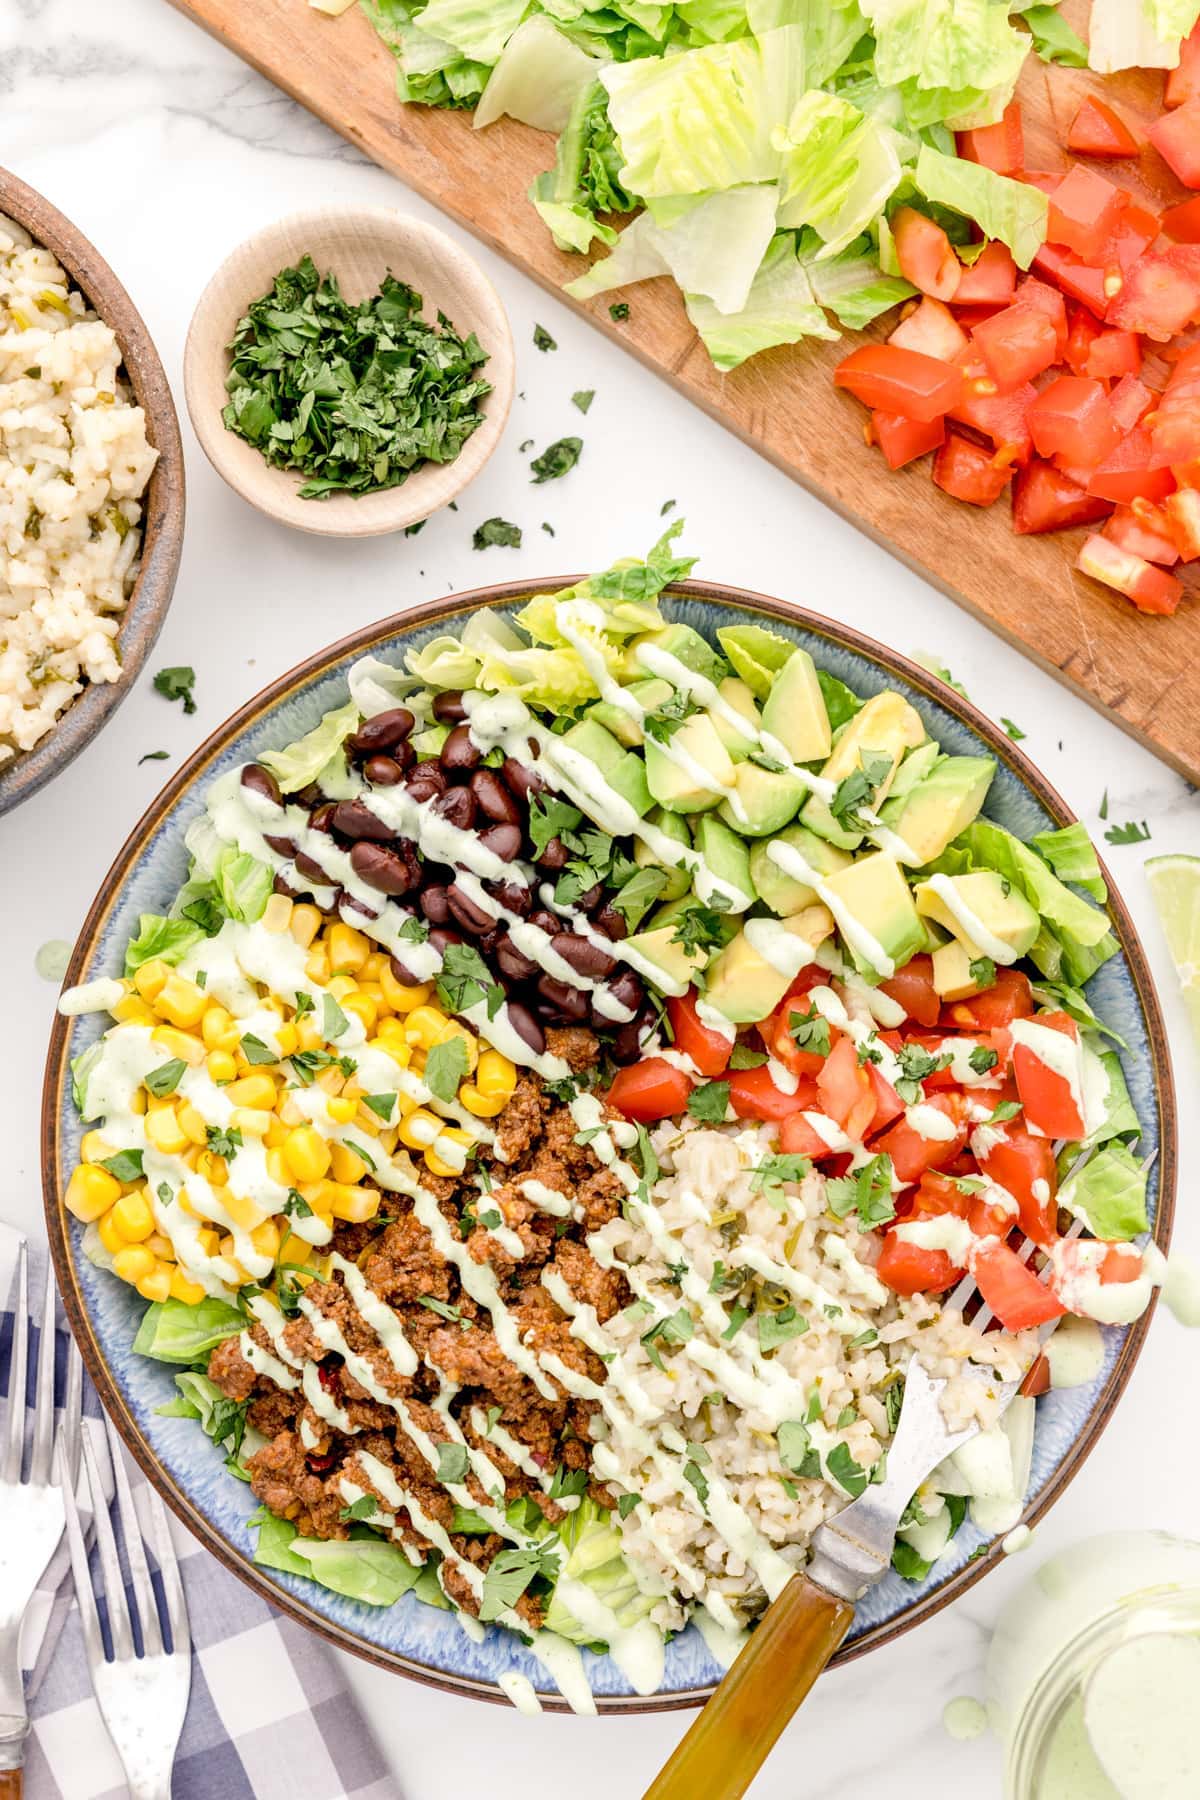 Taco bowl drizzled with creamy cilantro dressing.